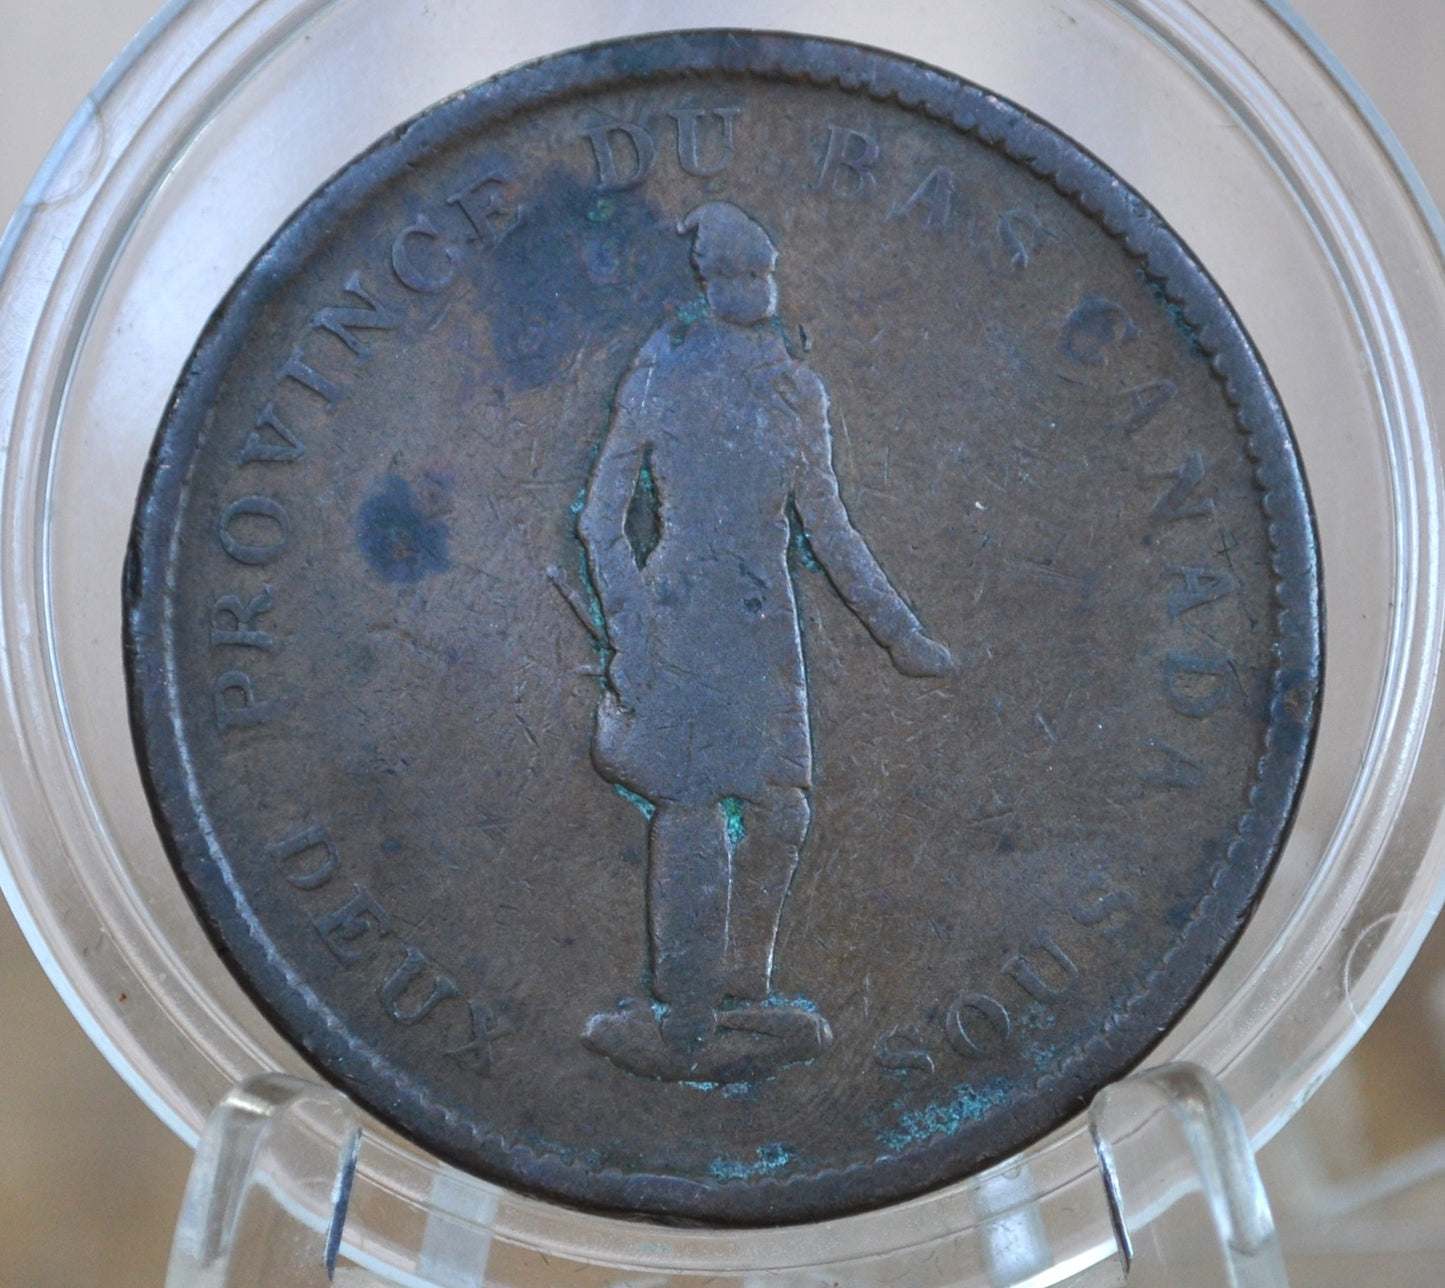 1837 One Penny Bank Token - Great Condition (VG/F) - 1 Penny Bank Token 1837 Bank of Montreal Canadian Bank Token 1837, Low Mintage